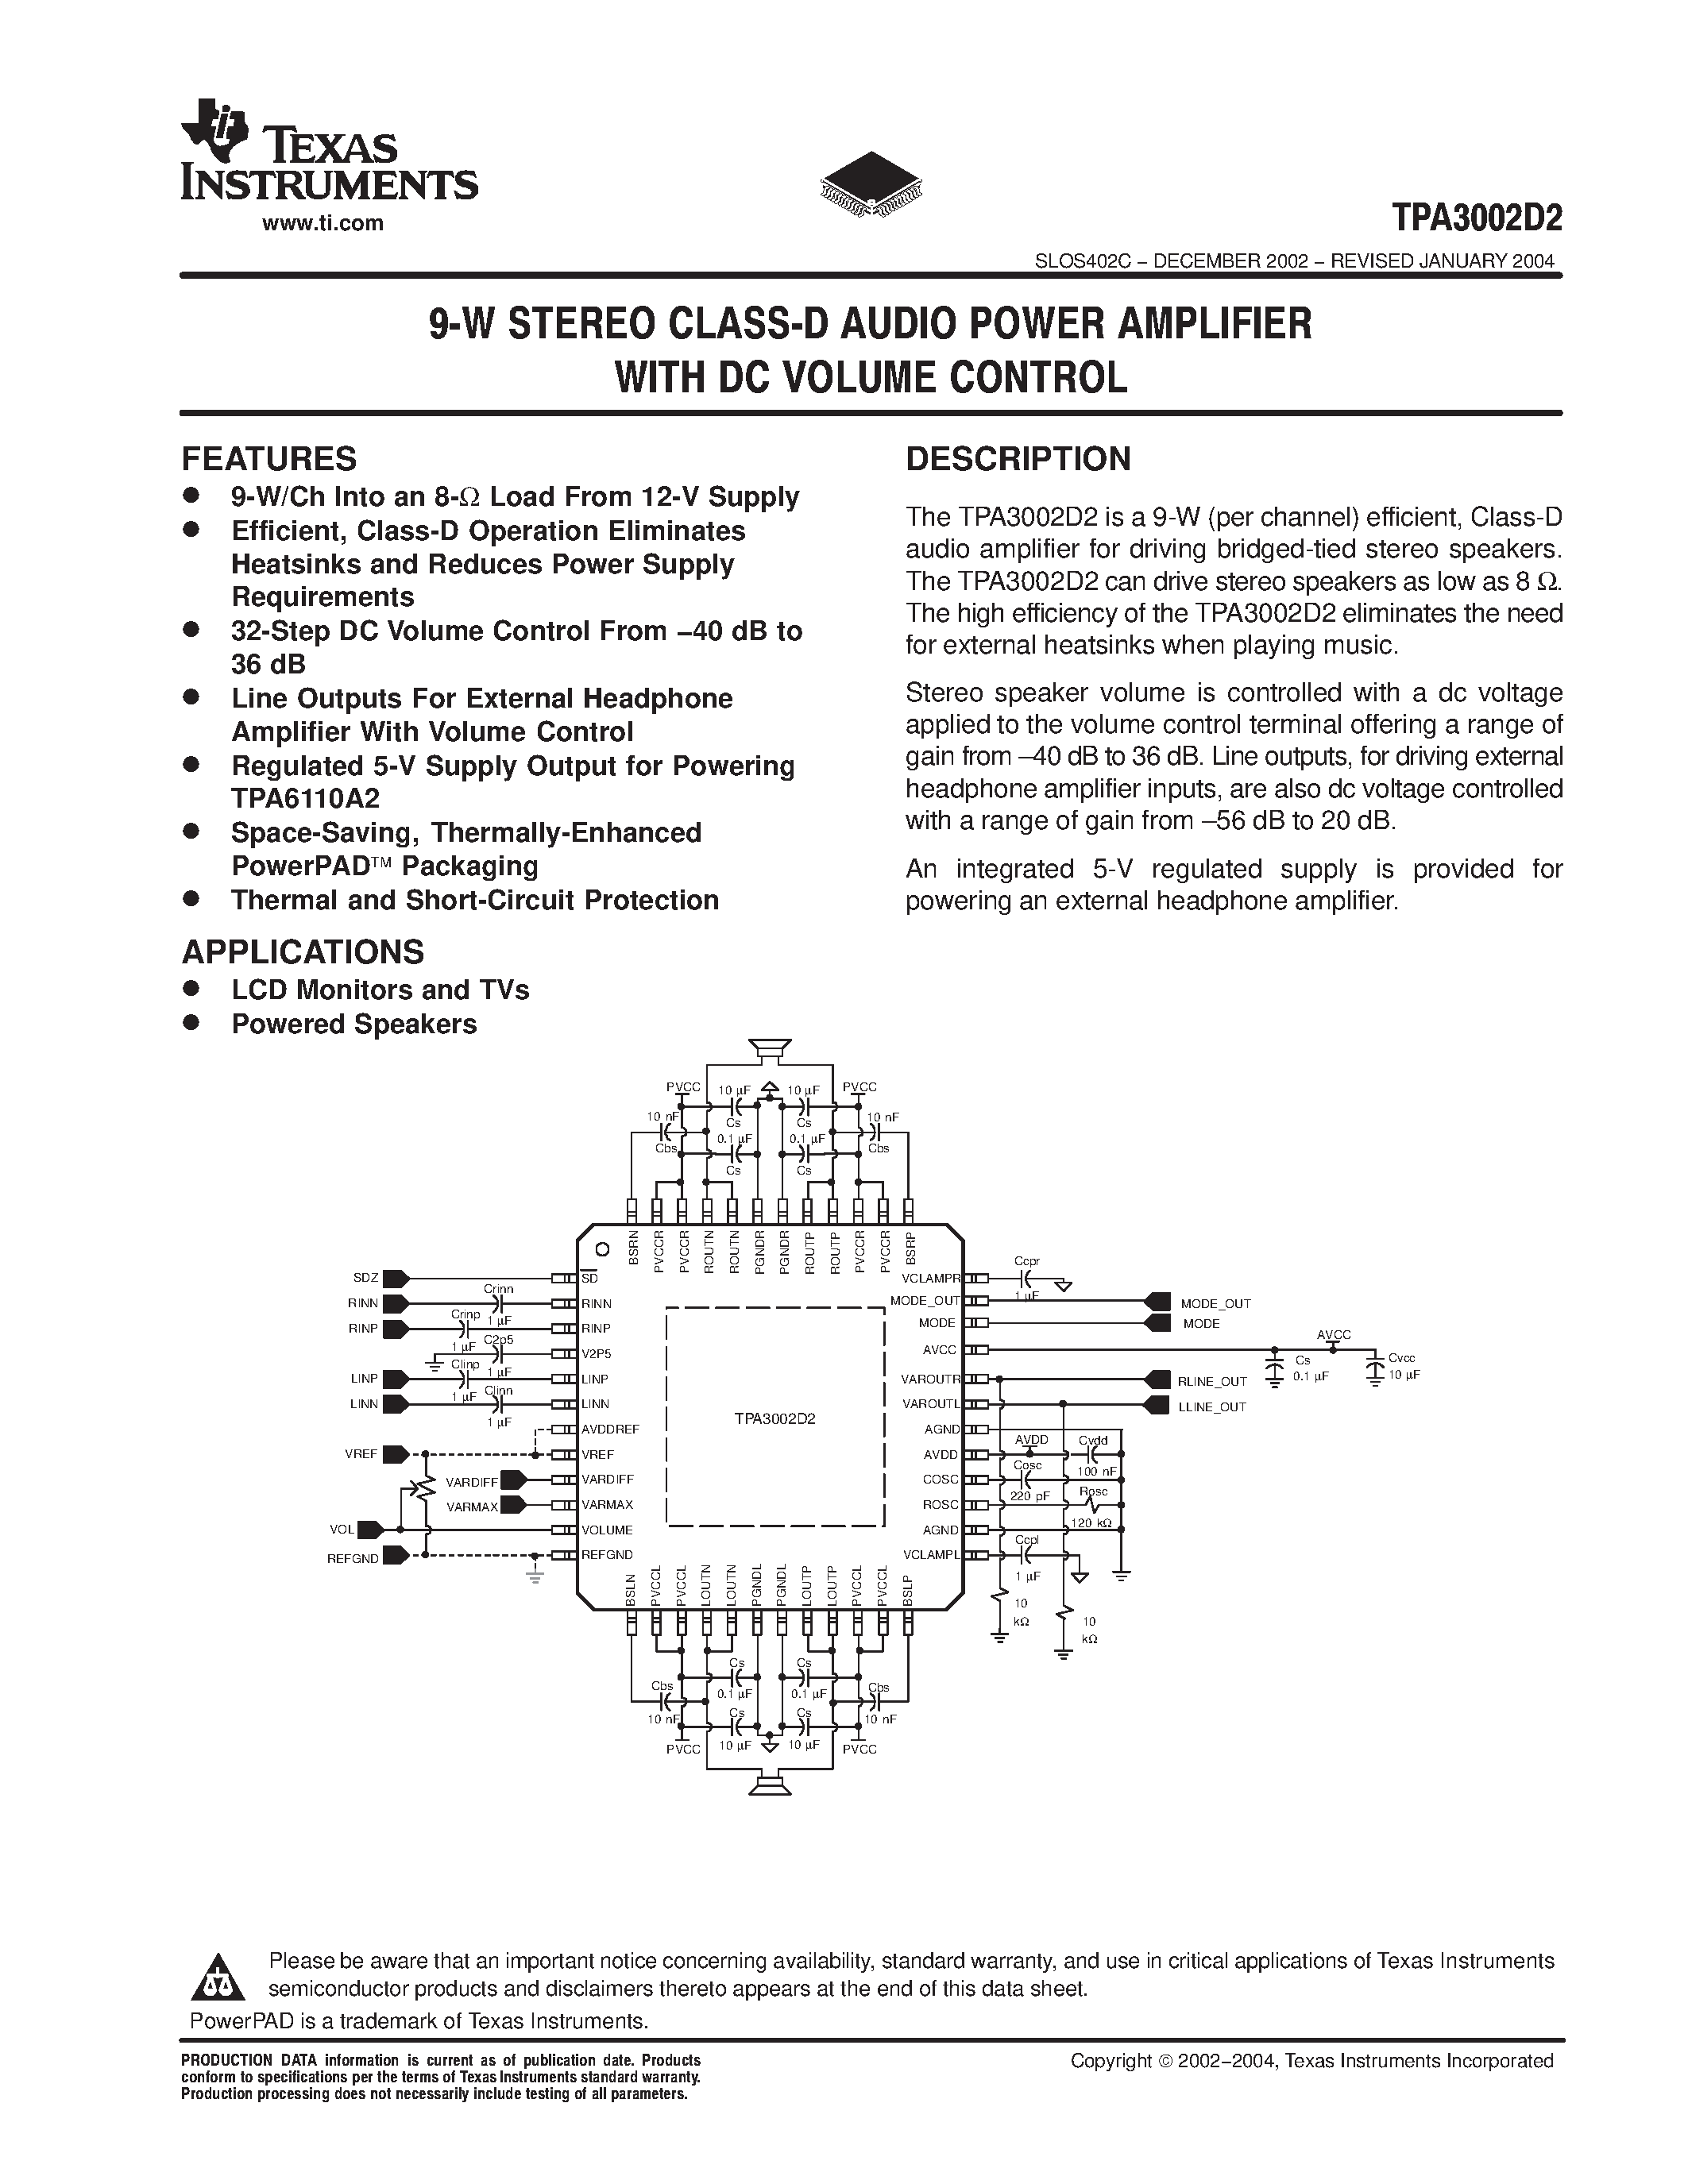 Datasheet TPA3002D2 - 9-W STEREO CLASS-D AUDIO POWER AMPLIFIER WITH DC VOLUME CONTROL page 1